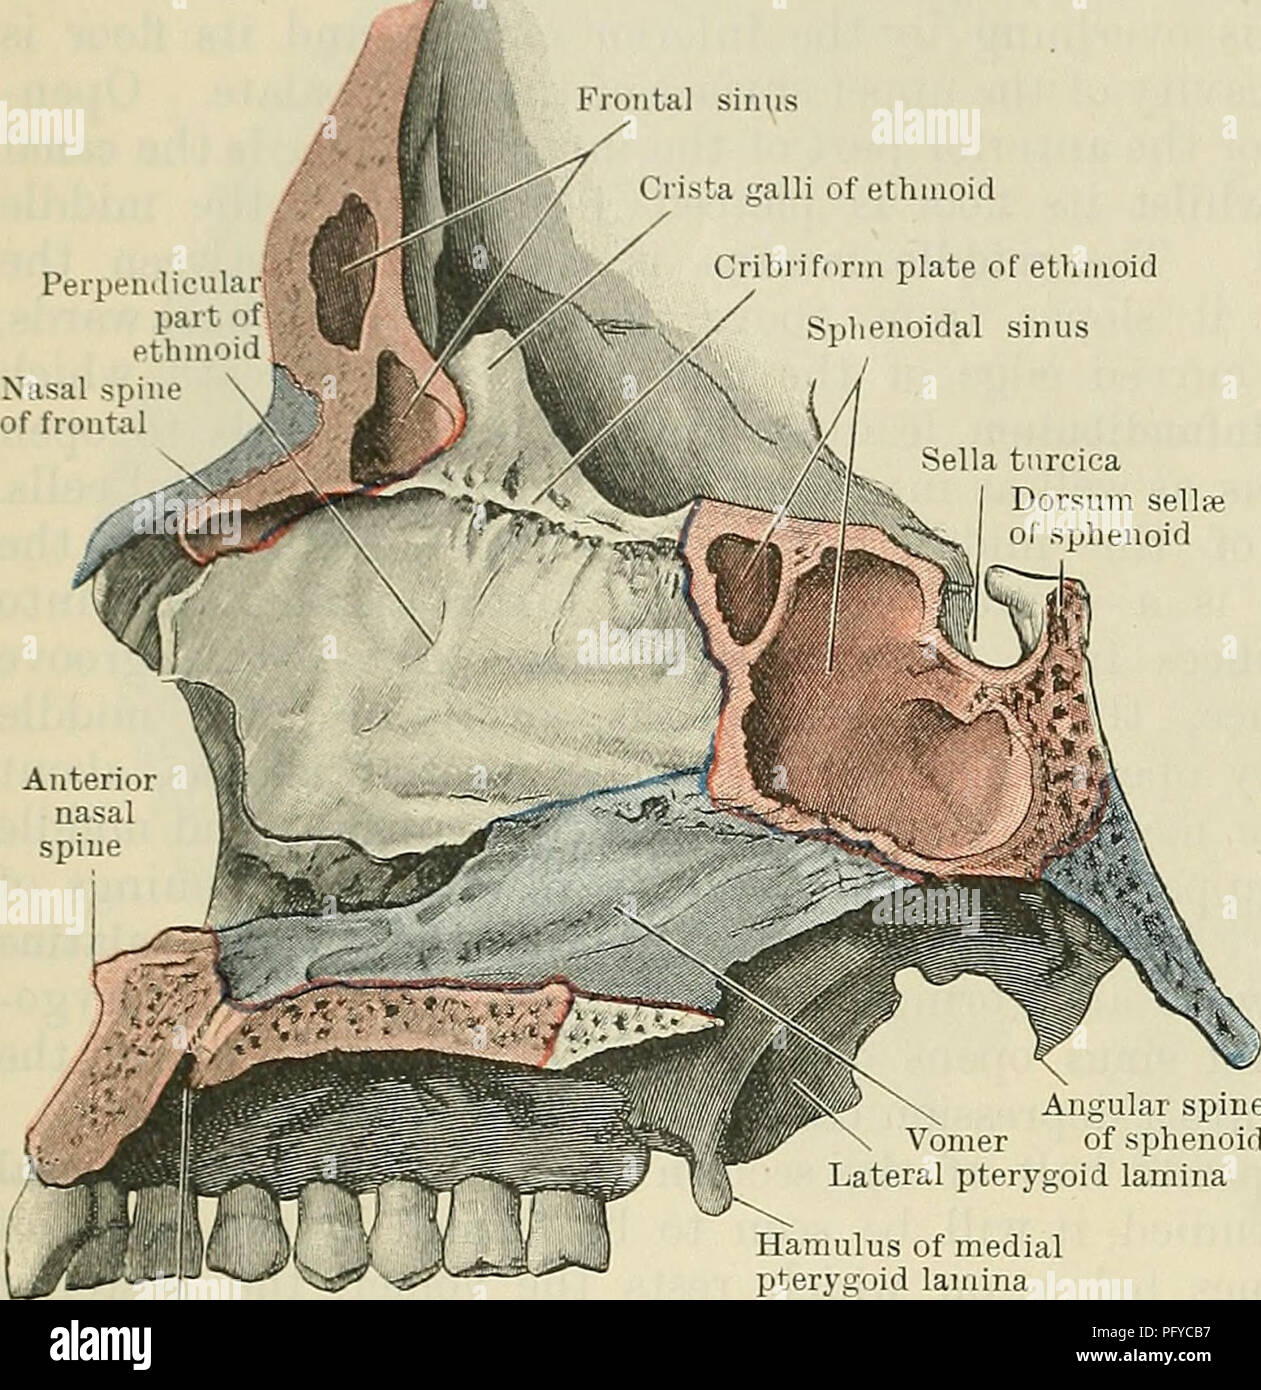 . Cunningham's Text-book of anatomy. Anatomy. 186 OSTEOLOGY. Perpeiii Frontal sinus / Crista galli of ethmoid Cribriform plate of ethmoid Sphenoidal sinus Sella turcica Dorsum sellre of sphenoid The sinus in the orbital process of the palate bone either communicates with the sphenoidal sinus, or else assists in closing in some of the posterior ethmoidal cells. Its communication with the nasal cavity is through one or other of these spaces. The maxillary sinus lies to the lateral side of the nasal cavity, occupying the body of the maxilla. Its walls, which are relatively thin, are directed upwa Stock Photo